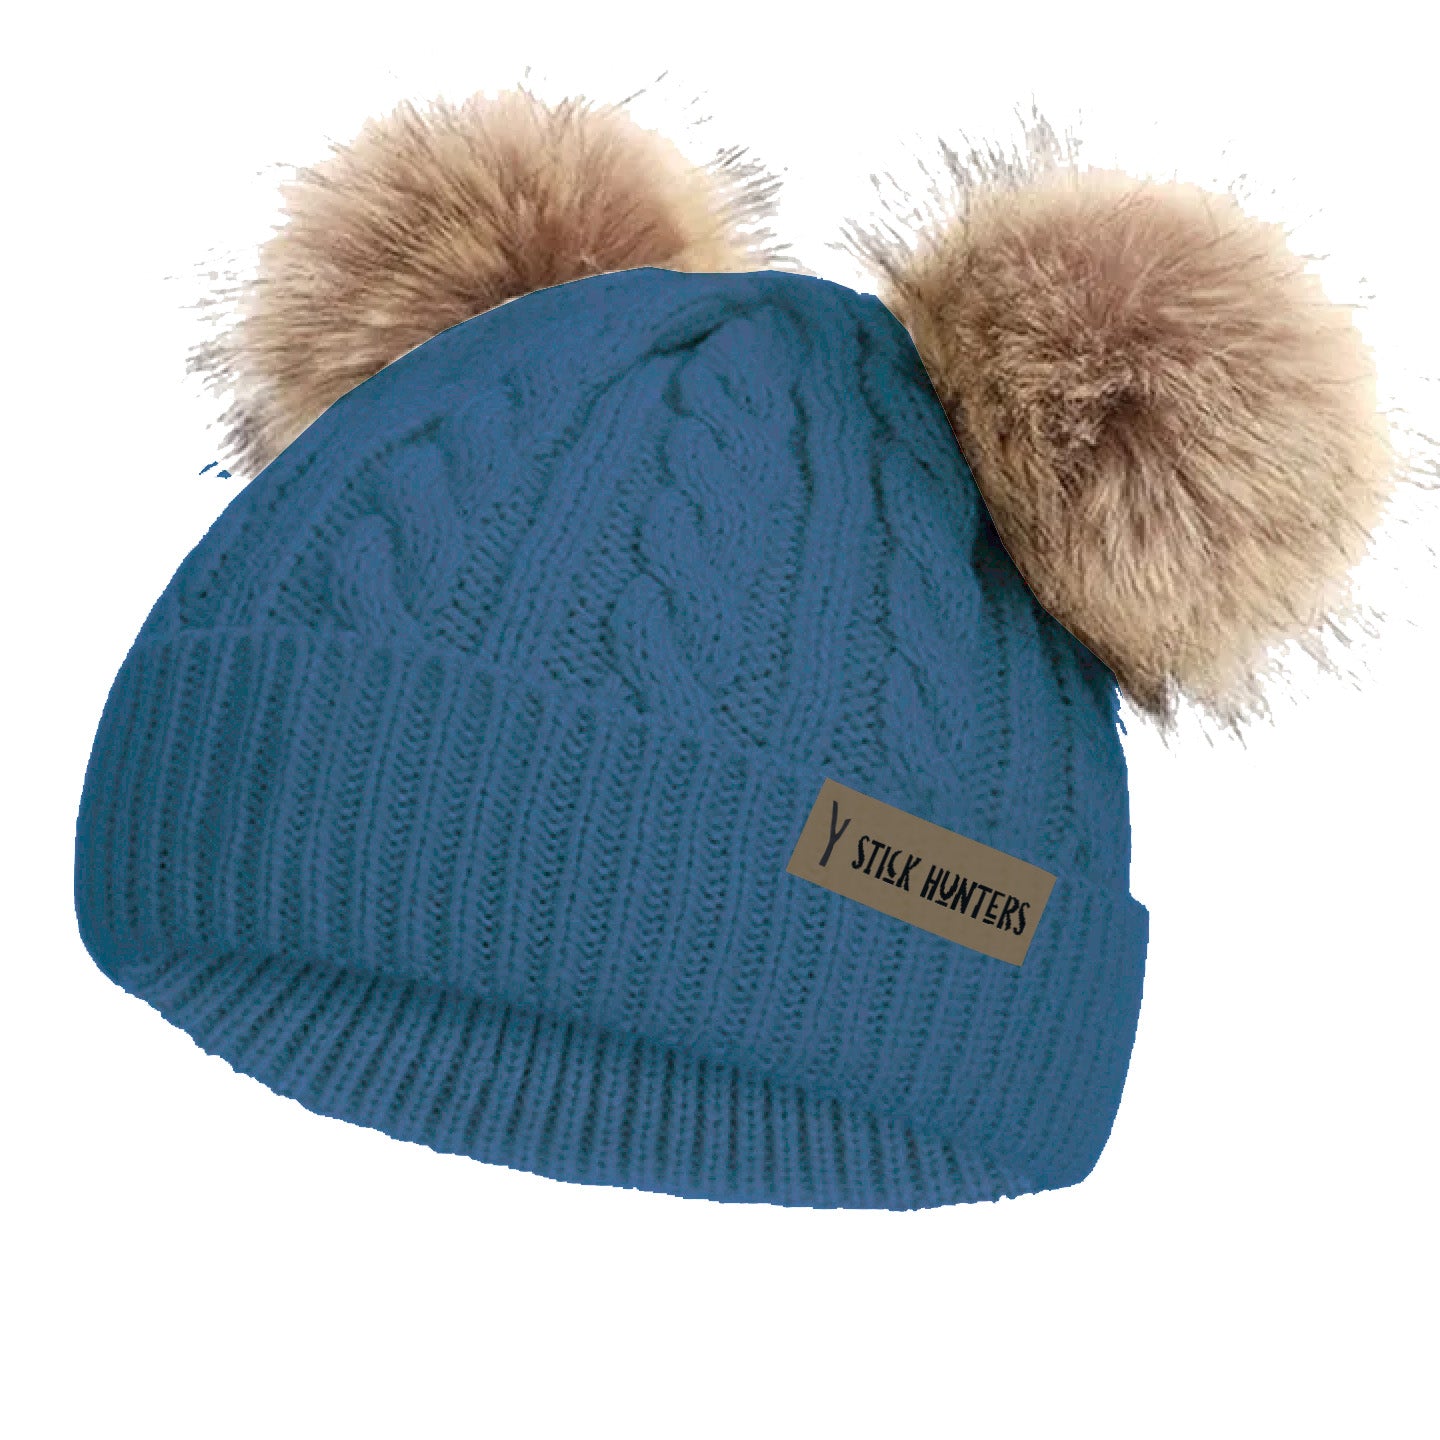 DOUBLE POMPOM WINTER BEANIE - PETROLEUM - AVAILABLE IN 3 SIZES